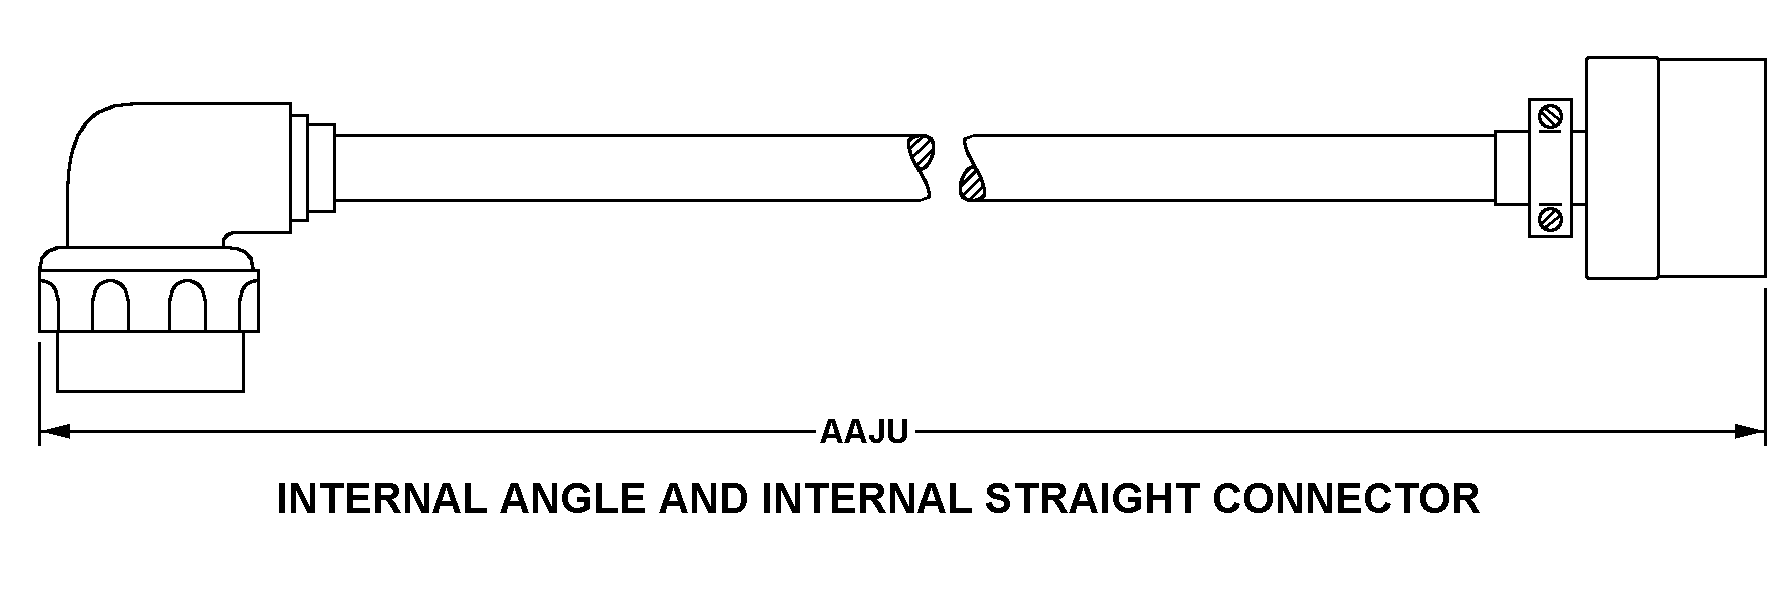 INTERNAL ANGLE AND INTERNAL STRAIGHT CONNECTOR style nsn 5995-01-276-7730